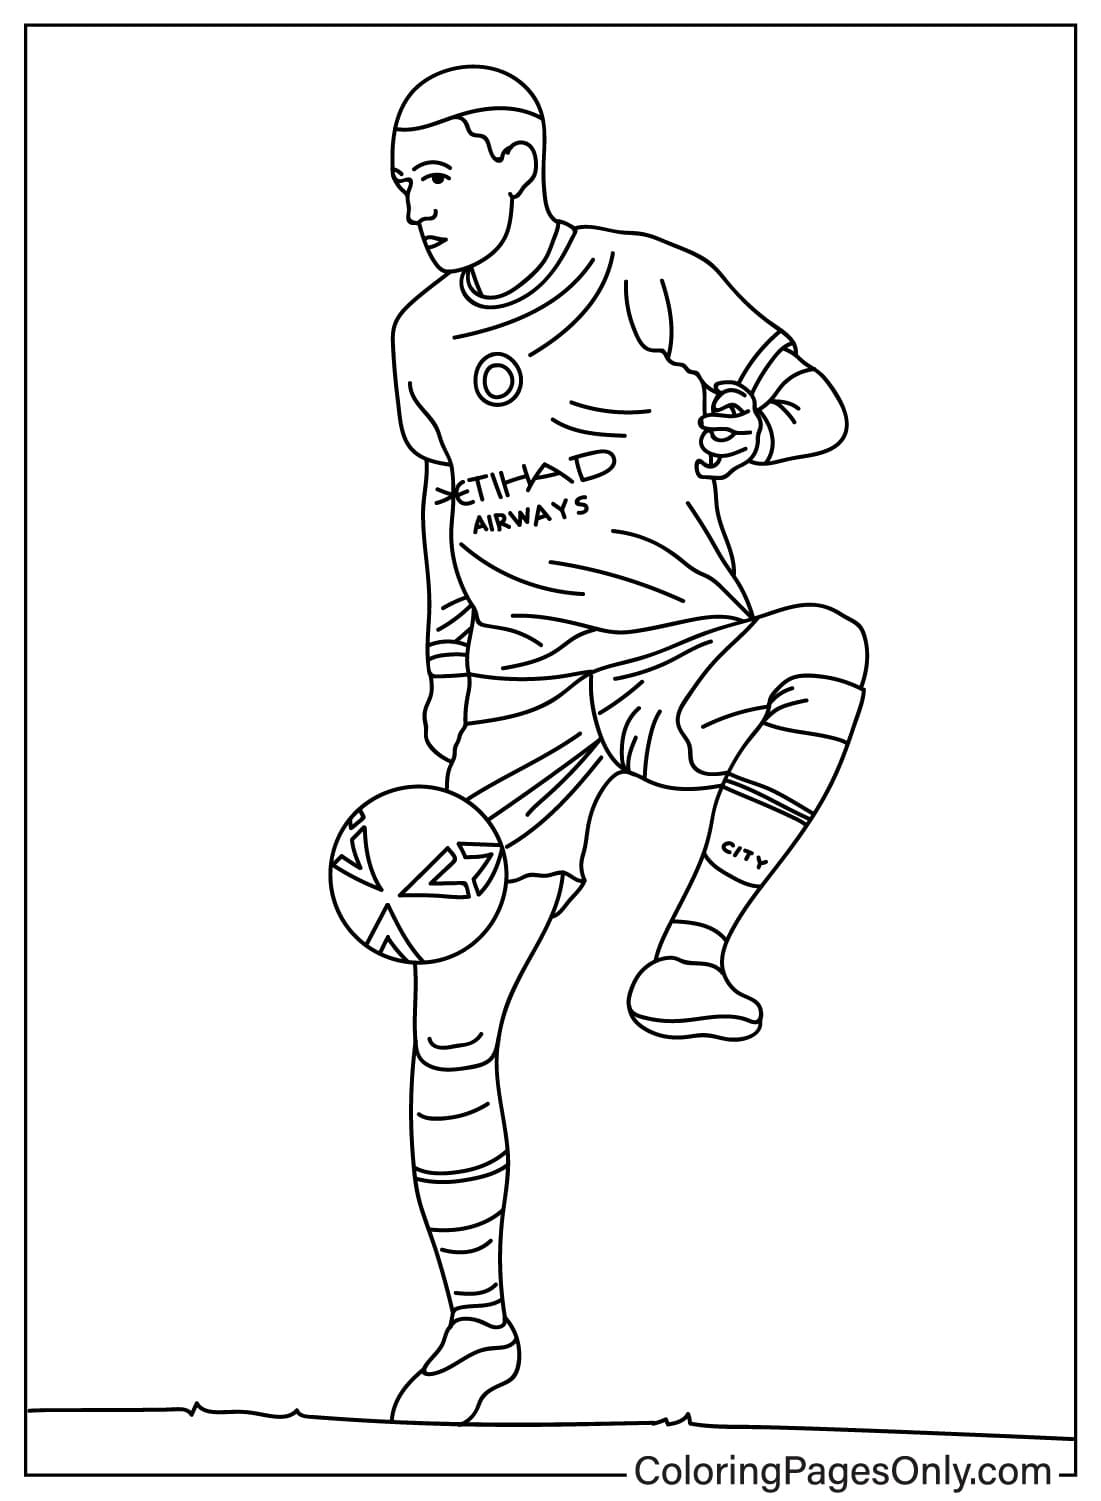 Play Football Phil Foden Coloring Page from Phil Foden